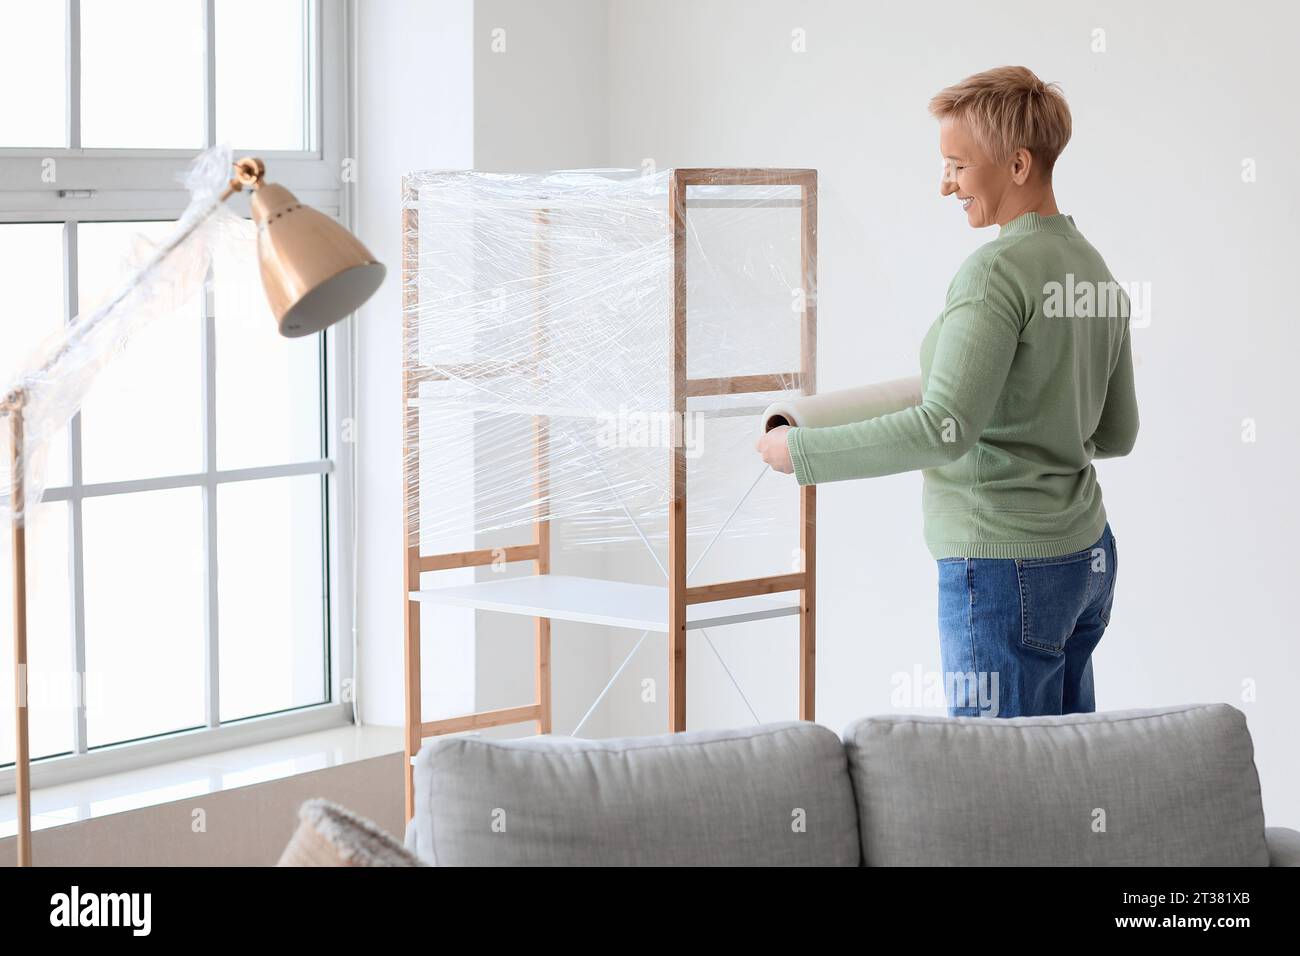 Mature woman wrapping shelving unit with stretch film at home Stock Photo